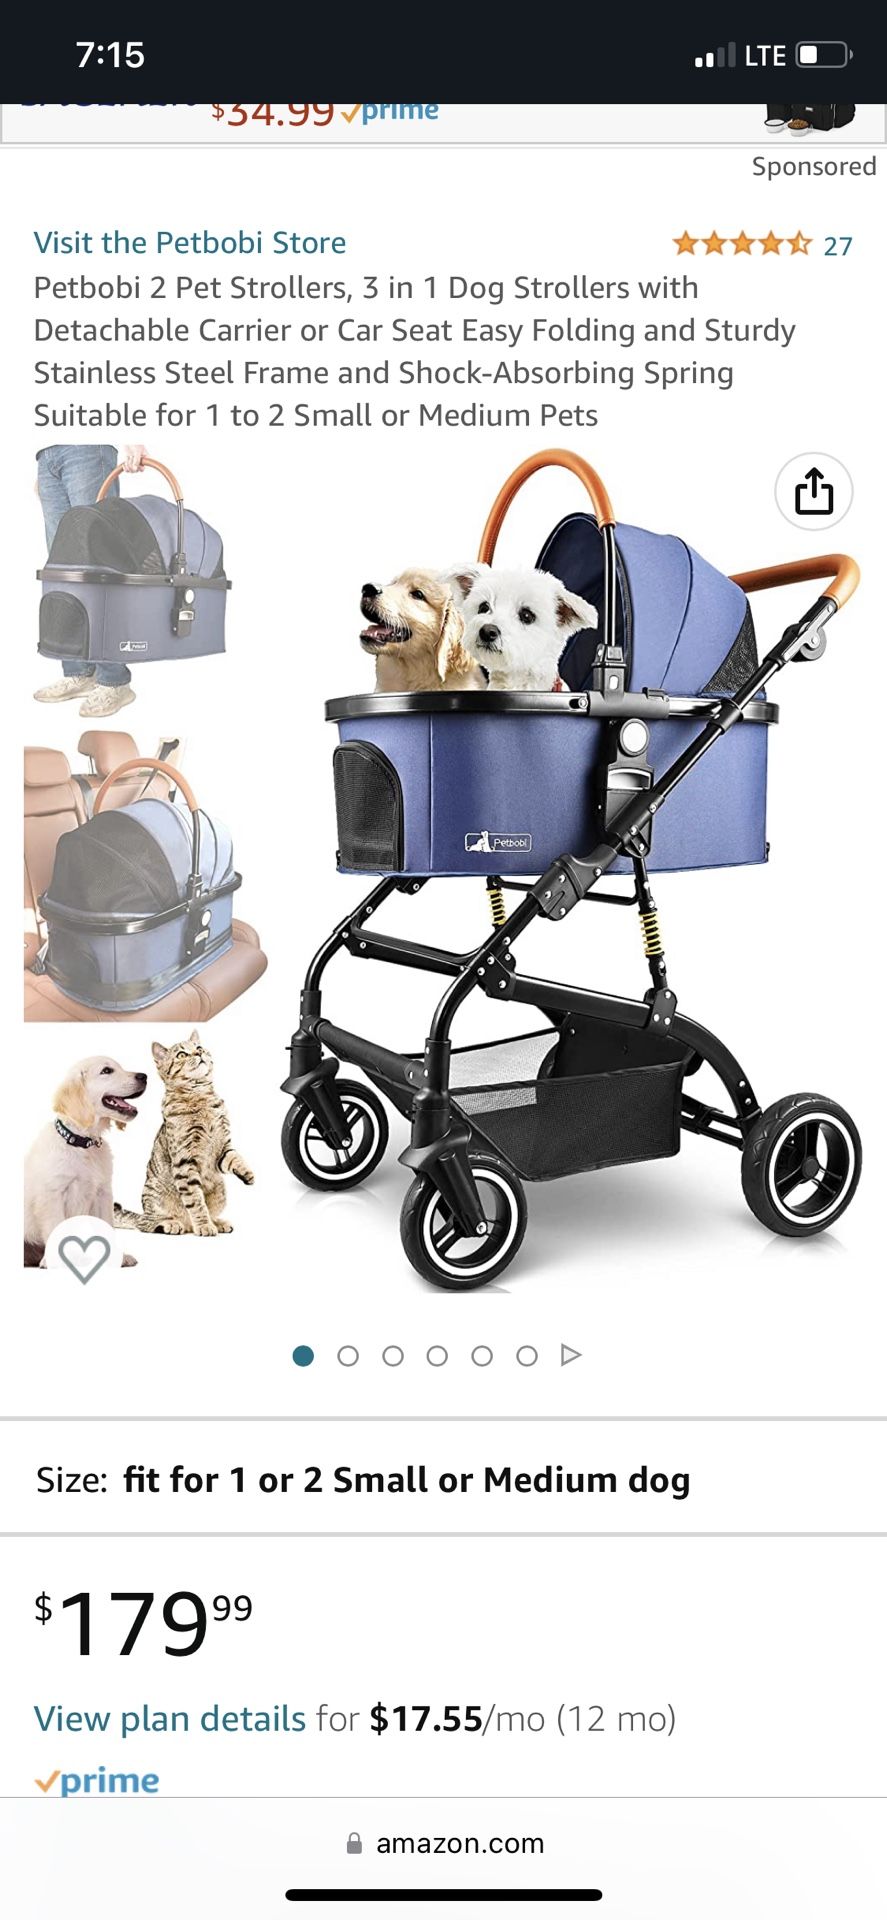 Petbobi 2 Pet Strollers, 3 in 1 Dog Strollers with Detachable Carrier or Car Seat Easy Folding and Sturdy Stainless Steel Frame and Shock-Absorbing Sp